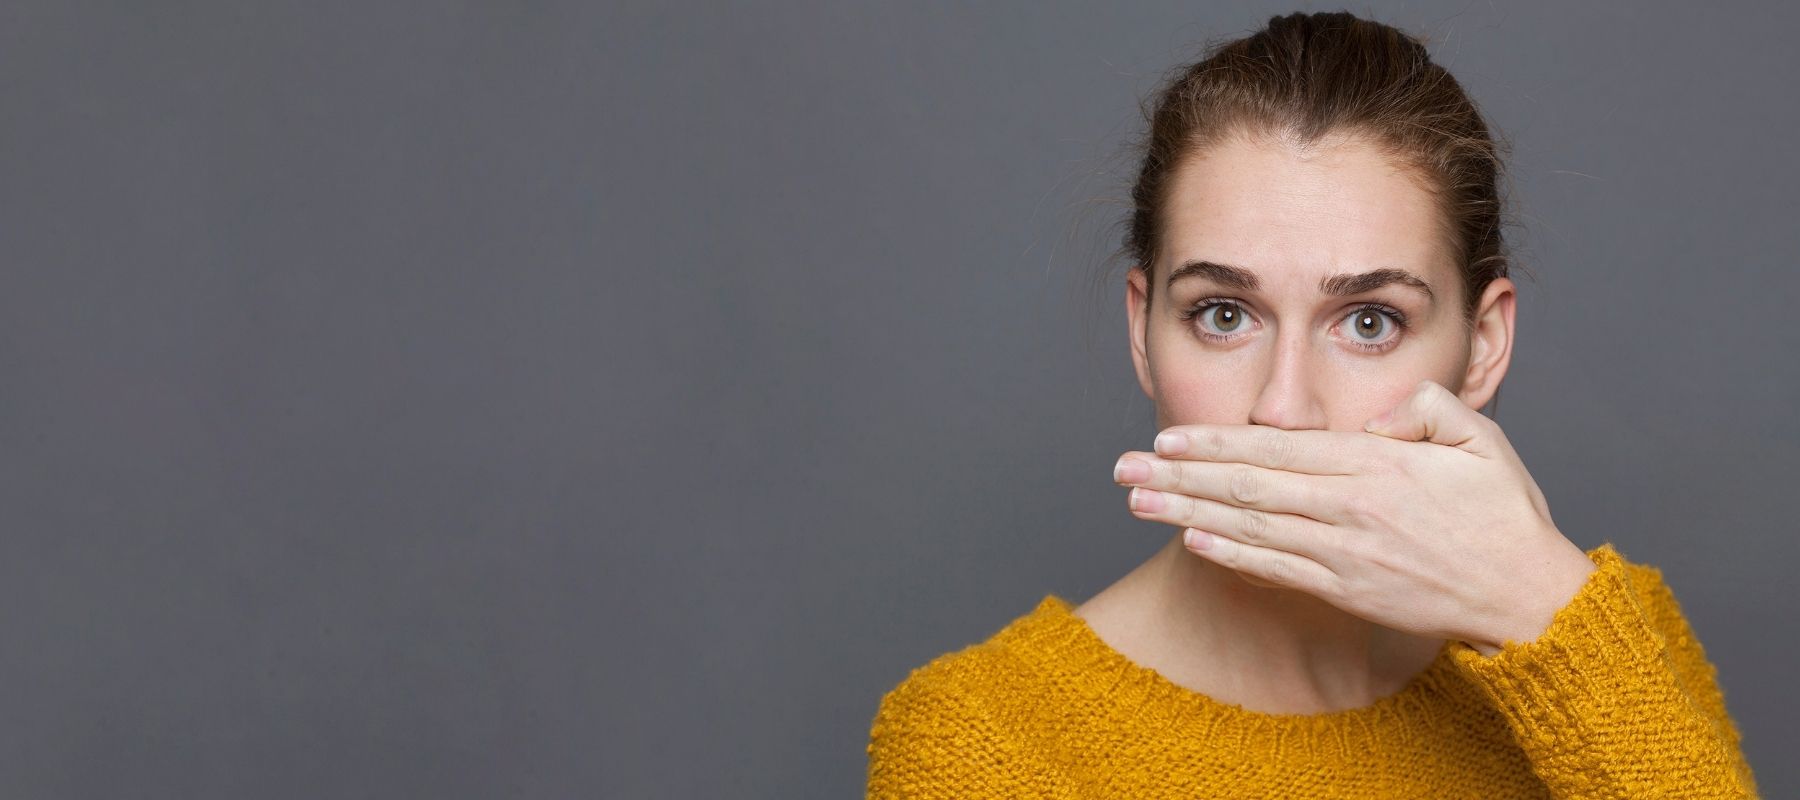 Woman wearing a yellow shirt covering her mouth to protect herself from bad breath